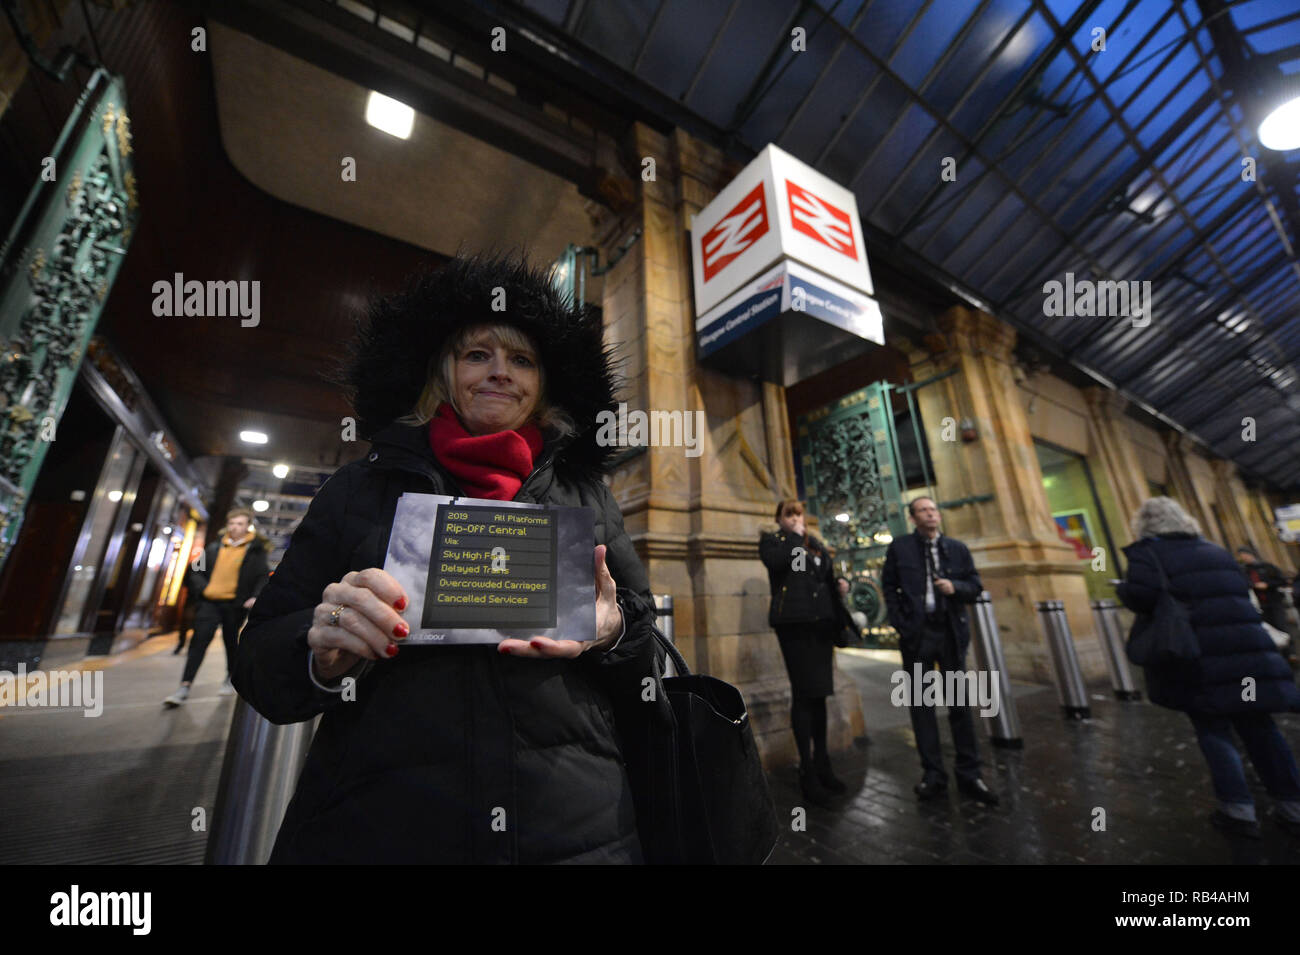 Glasgow, Scotland, UK.7th JAnuary 2019. Scottish Labour Leader - Richard Leonard MSP and campaigners hit train stations across Scotland today, as the party campaigns on its policy of public ownership.  The party steps up its campaign on public ownership as people from across Scotland start their first full week at work after the festive break.  Fares rose this month as SNP ministers ignored Labour’s plan for a Fares Freeze in the Scottish budget. Credit: Colin Fisher/Alamy Live News Stock Photo